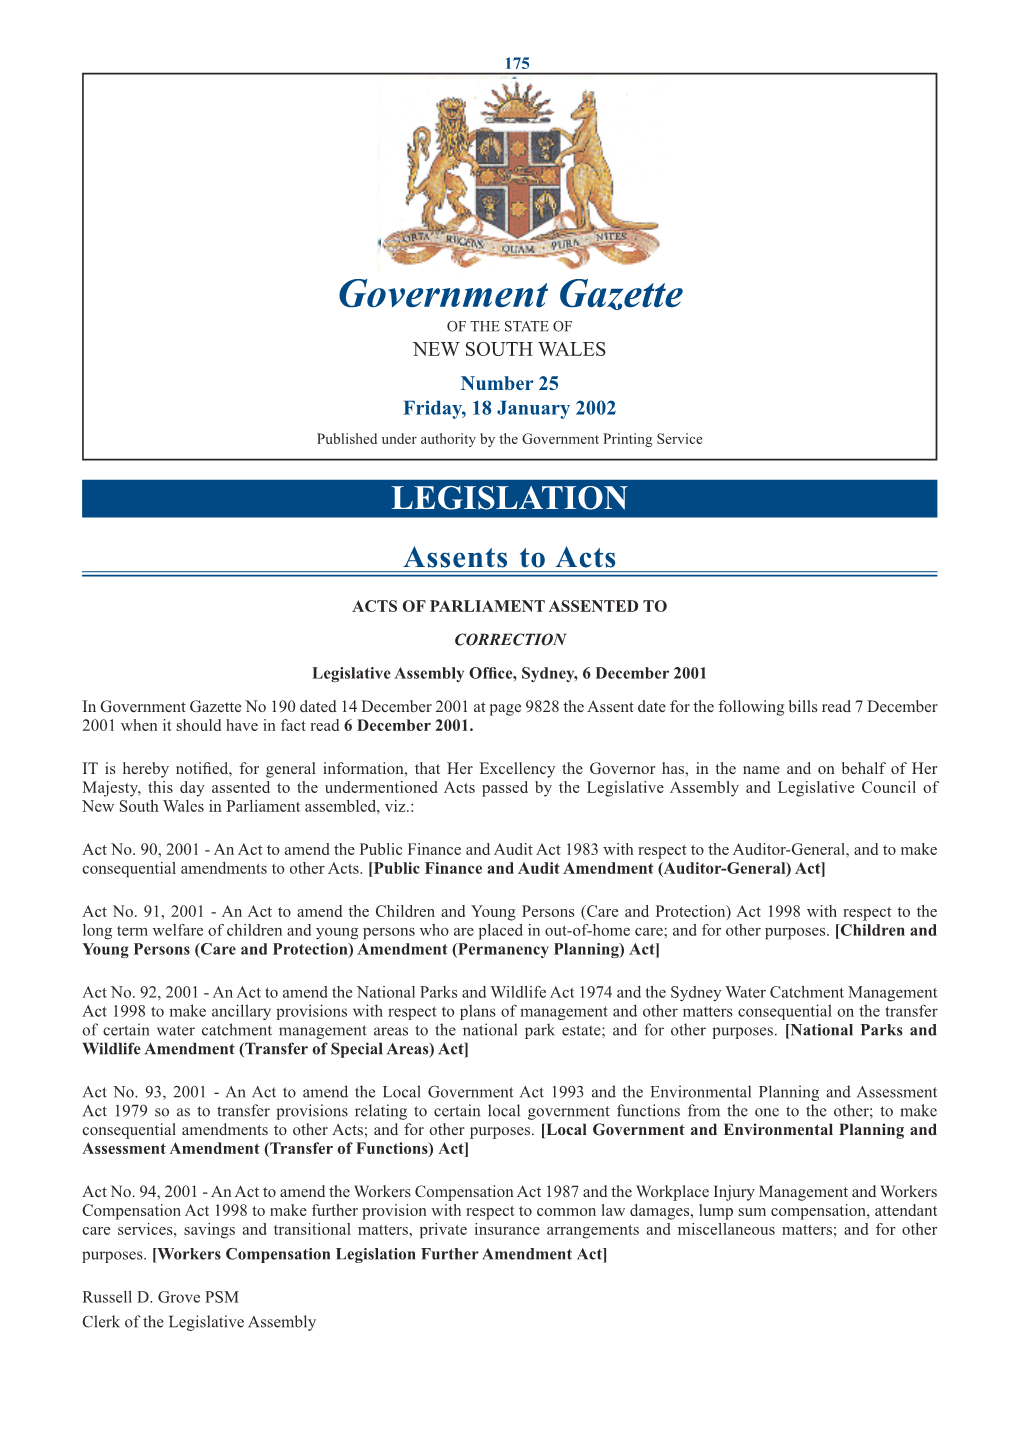 New South Wales Government Gazette No 3 of 18 January